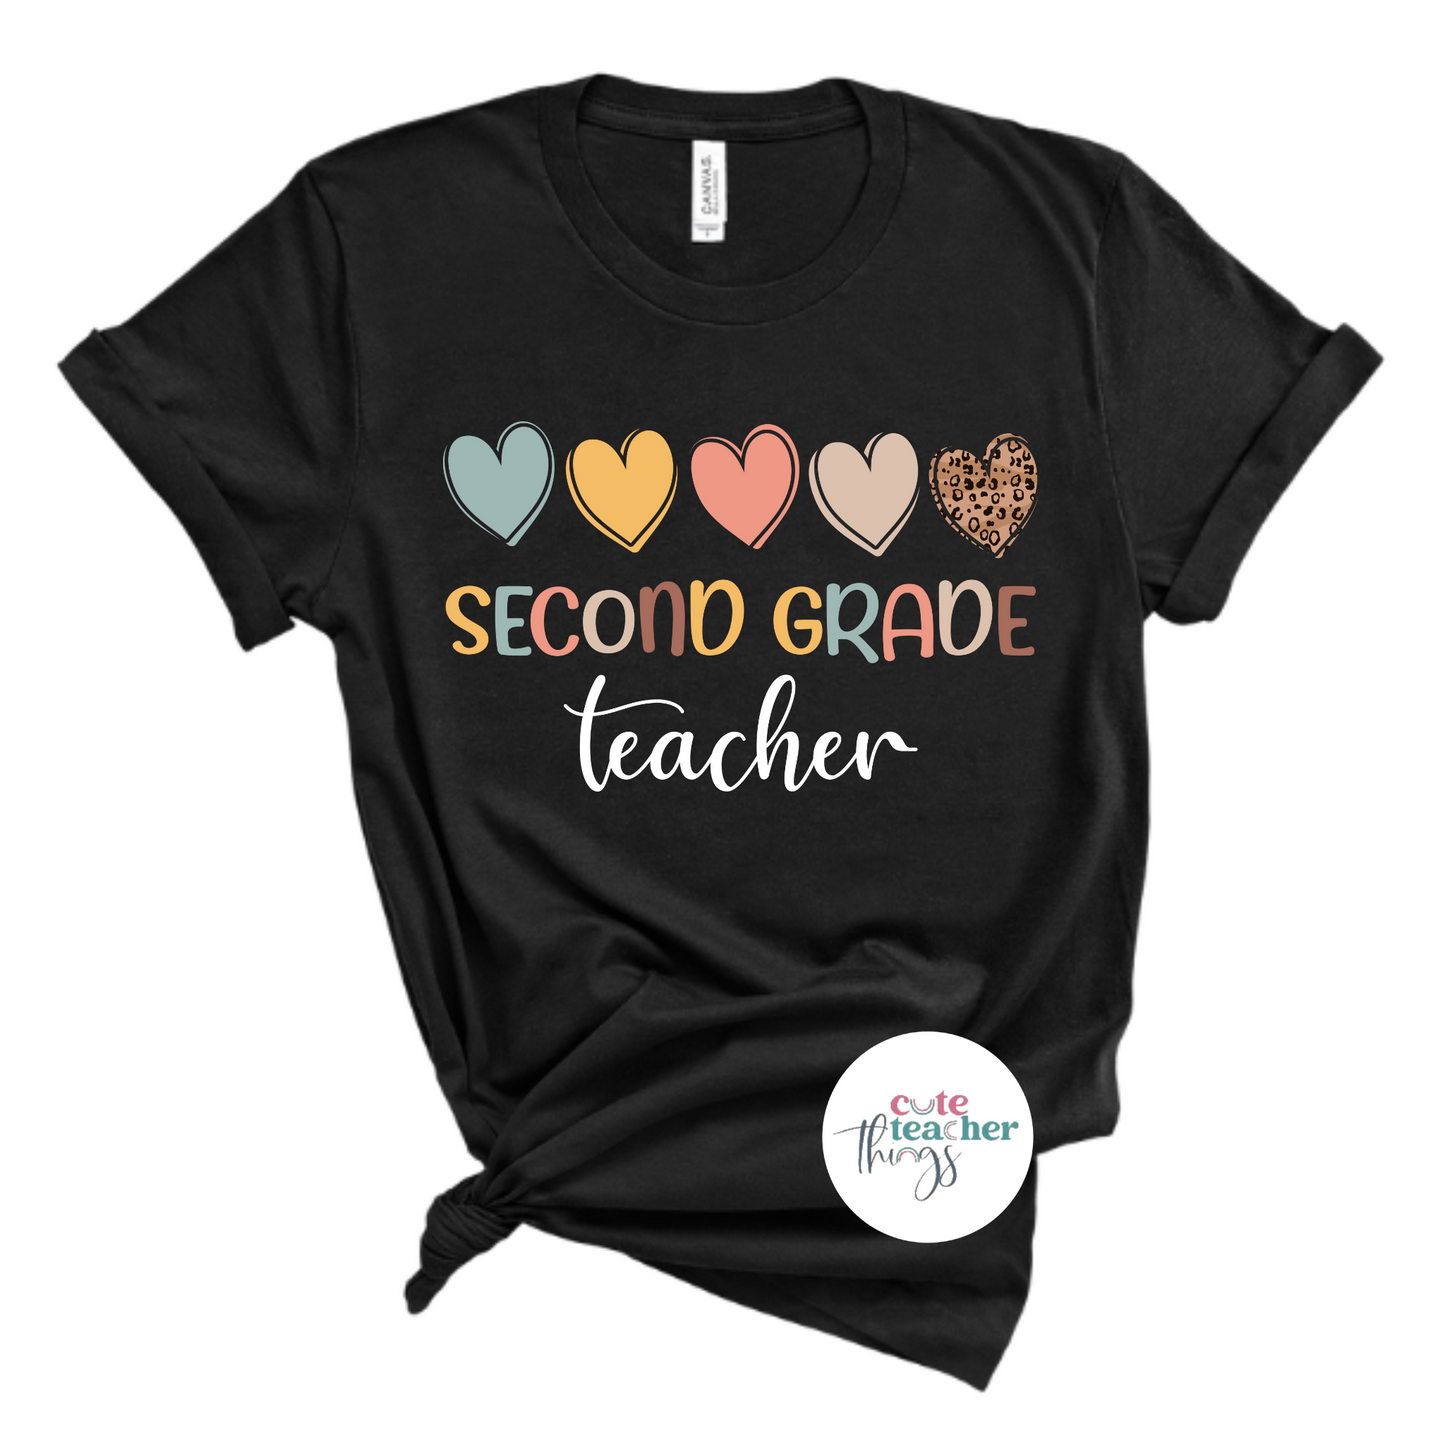 back to school, teachers day t-shirt, affirmation shirt, first day of school tee